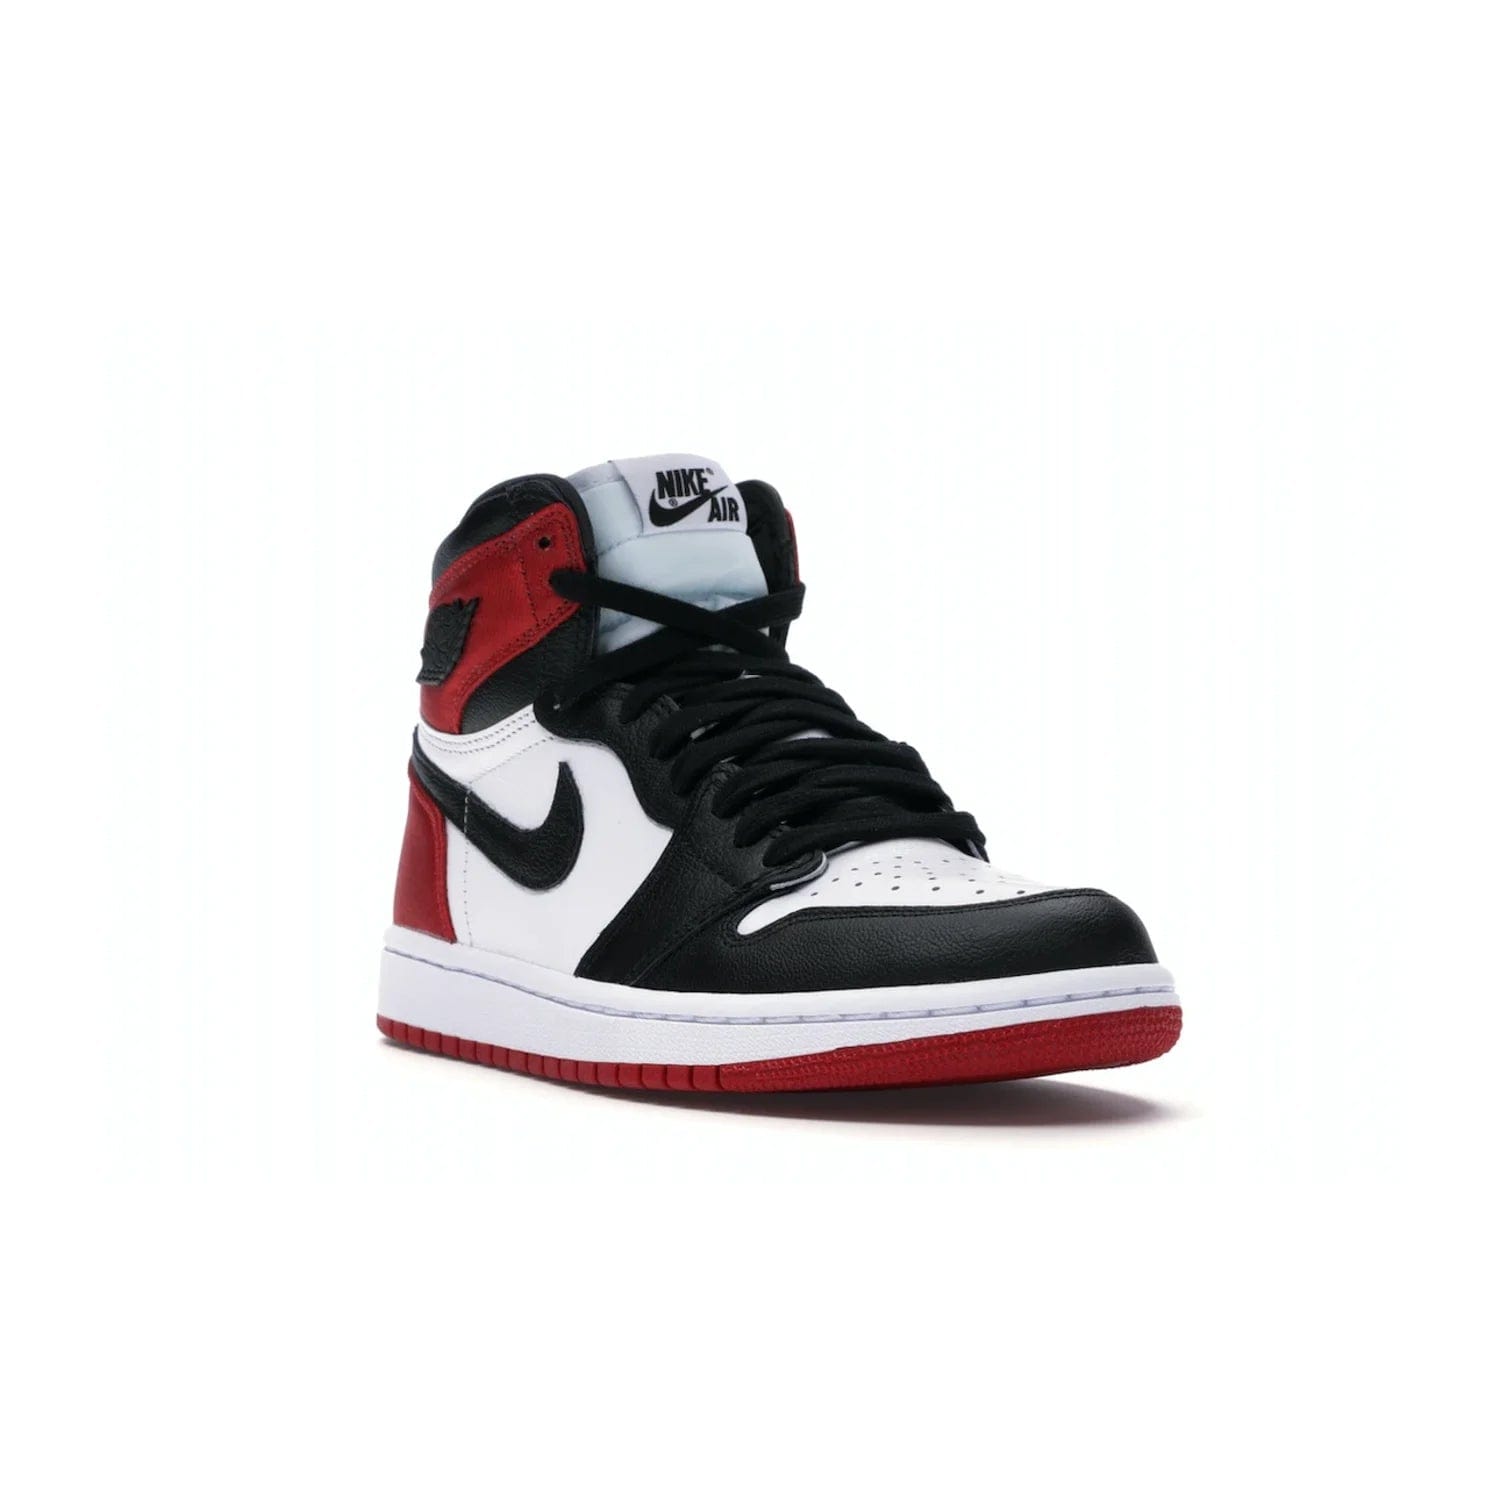 Jordan 1 Retro High Satin Black Toe (Women's) - Image 6 - Only at www.BallersClubKickz.com - Luxurious take on the timeless Air Jordan 1. Features a mix of black leather and satin materials with subtle University Red accents. Elevated look with metal Wings logo on the heel. Released in August 2019.